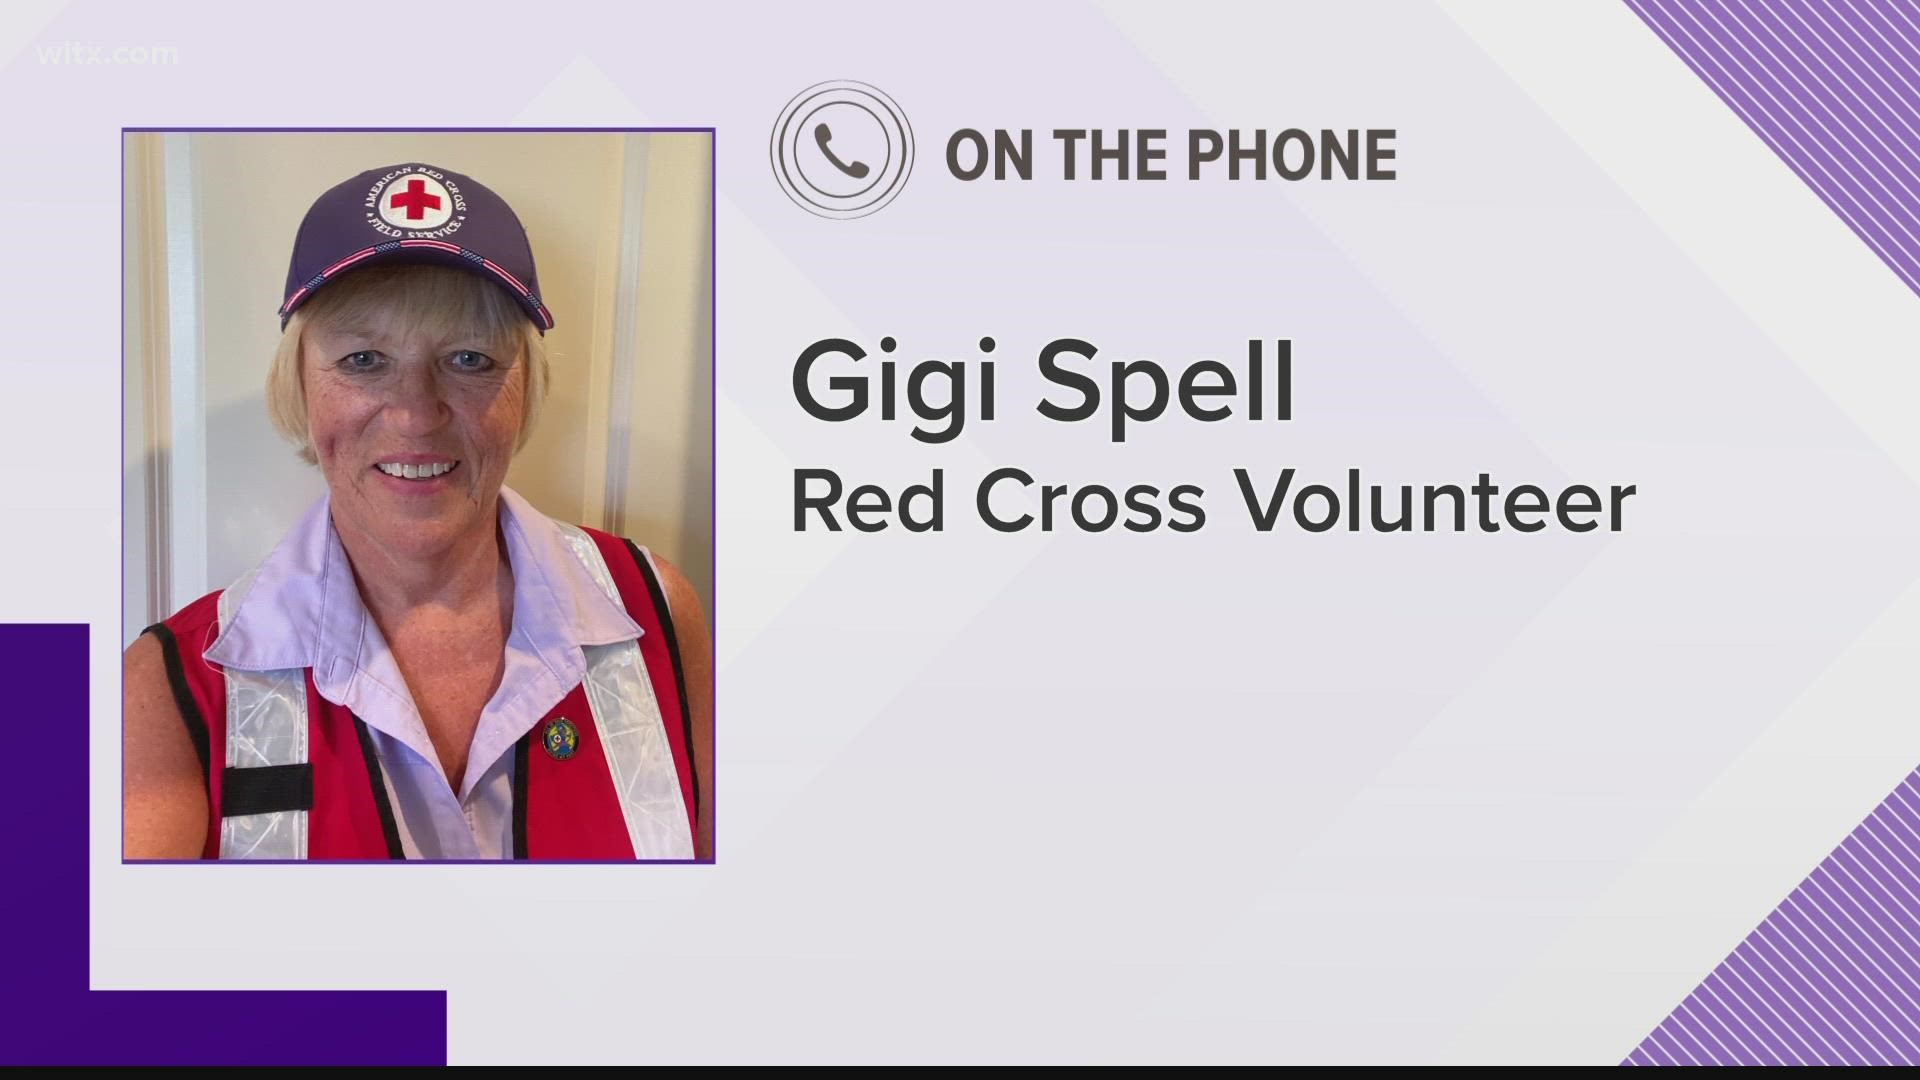 Hundreds of Red Cross volunteers from across the county are in Louisiana to help with hurricane recovery, two volunteers from SC talk about what they are seeing.